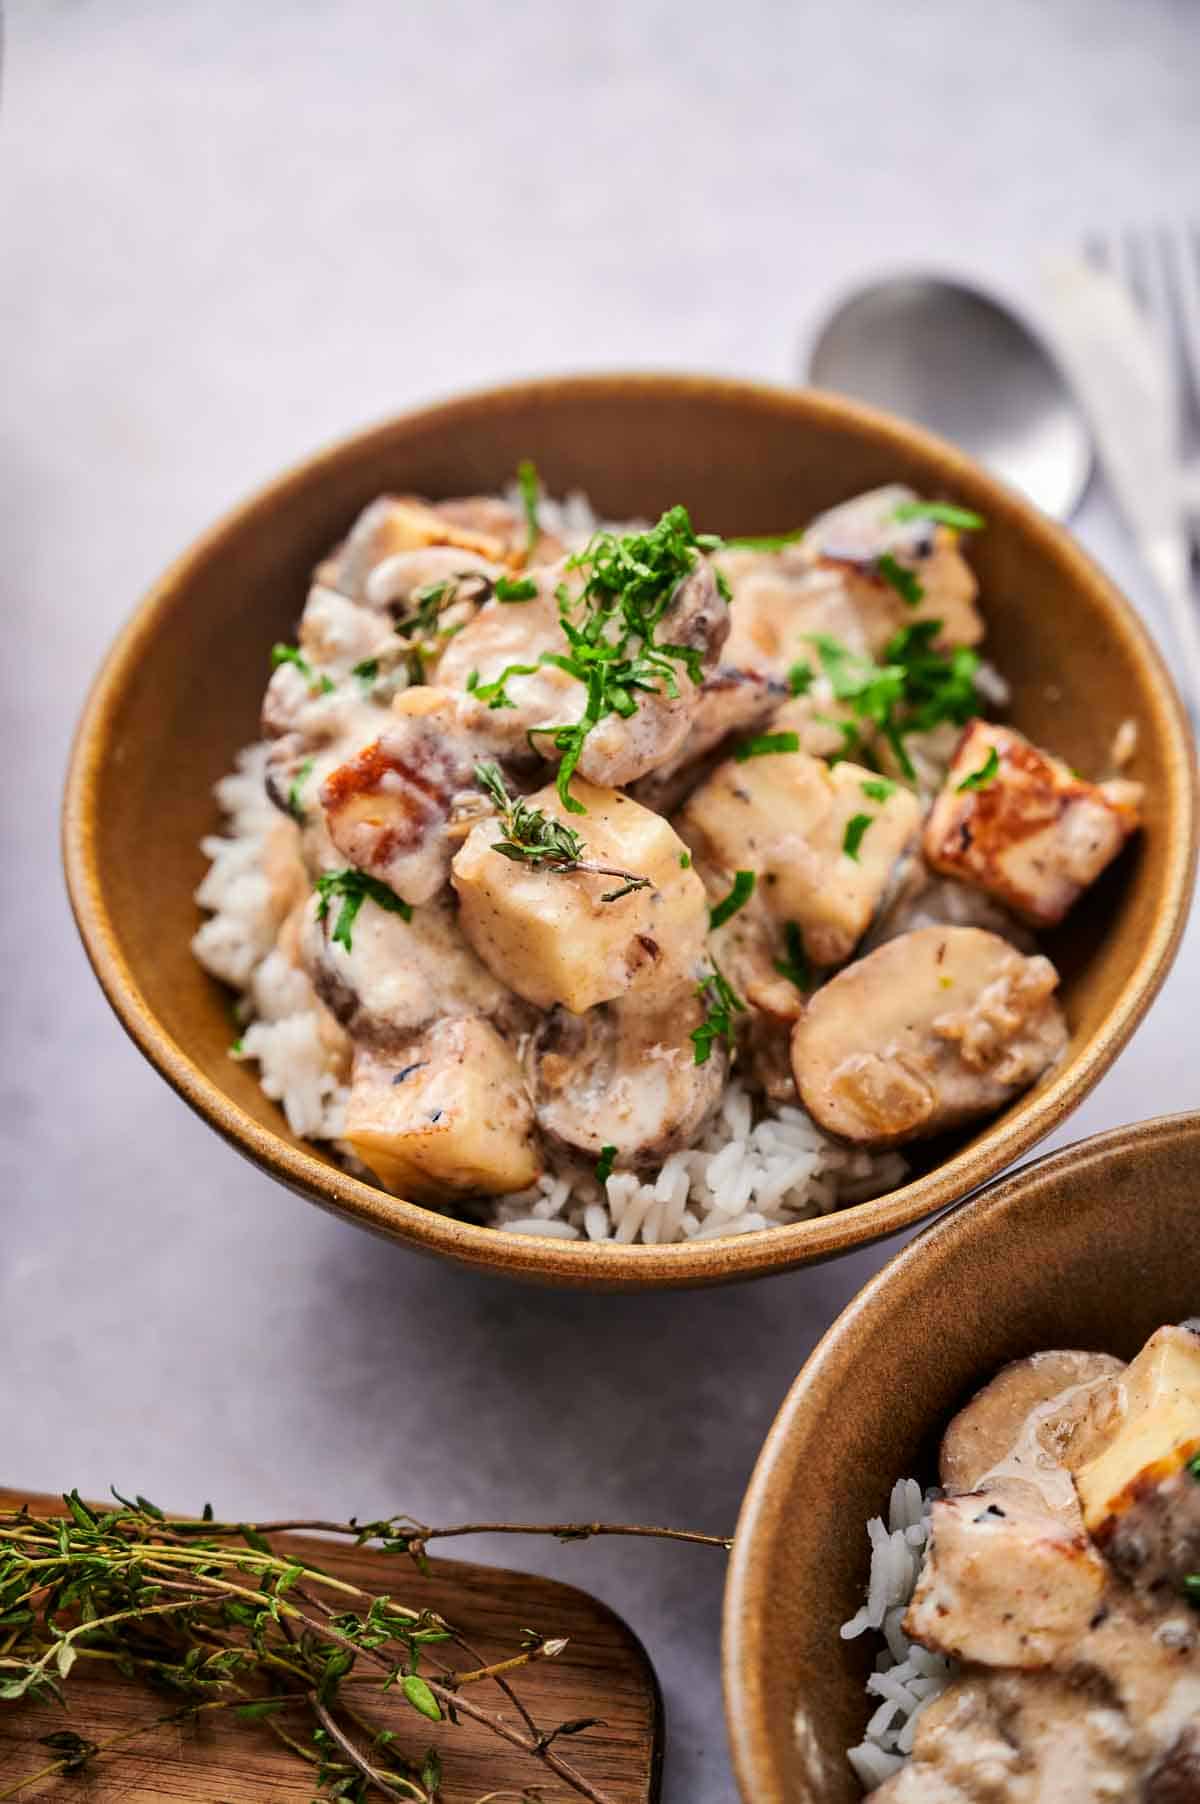 A vegetarian stroganoff made using halloumi cheese, in a brown bowl, served over white rice.